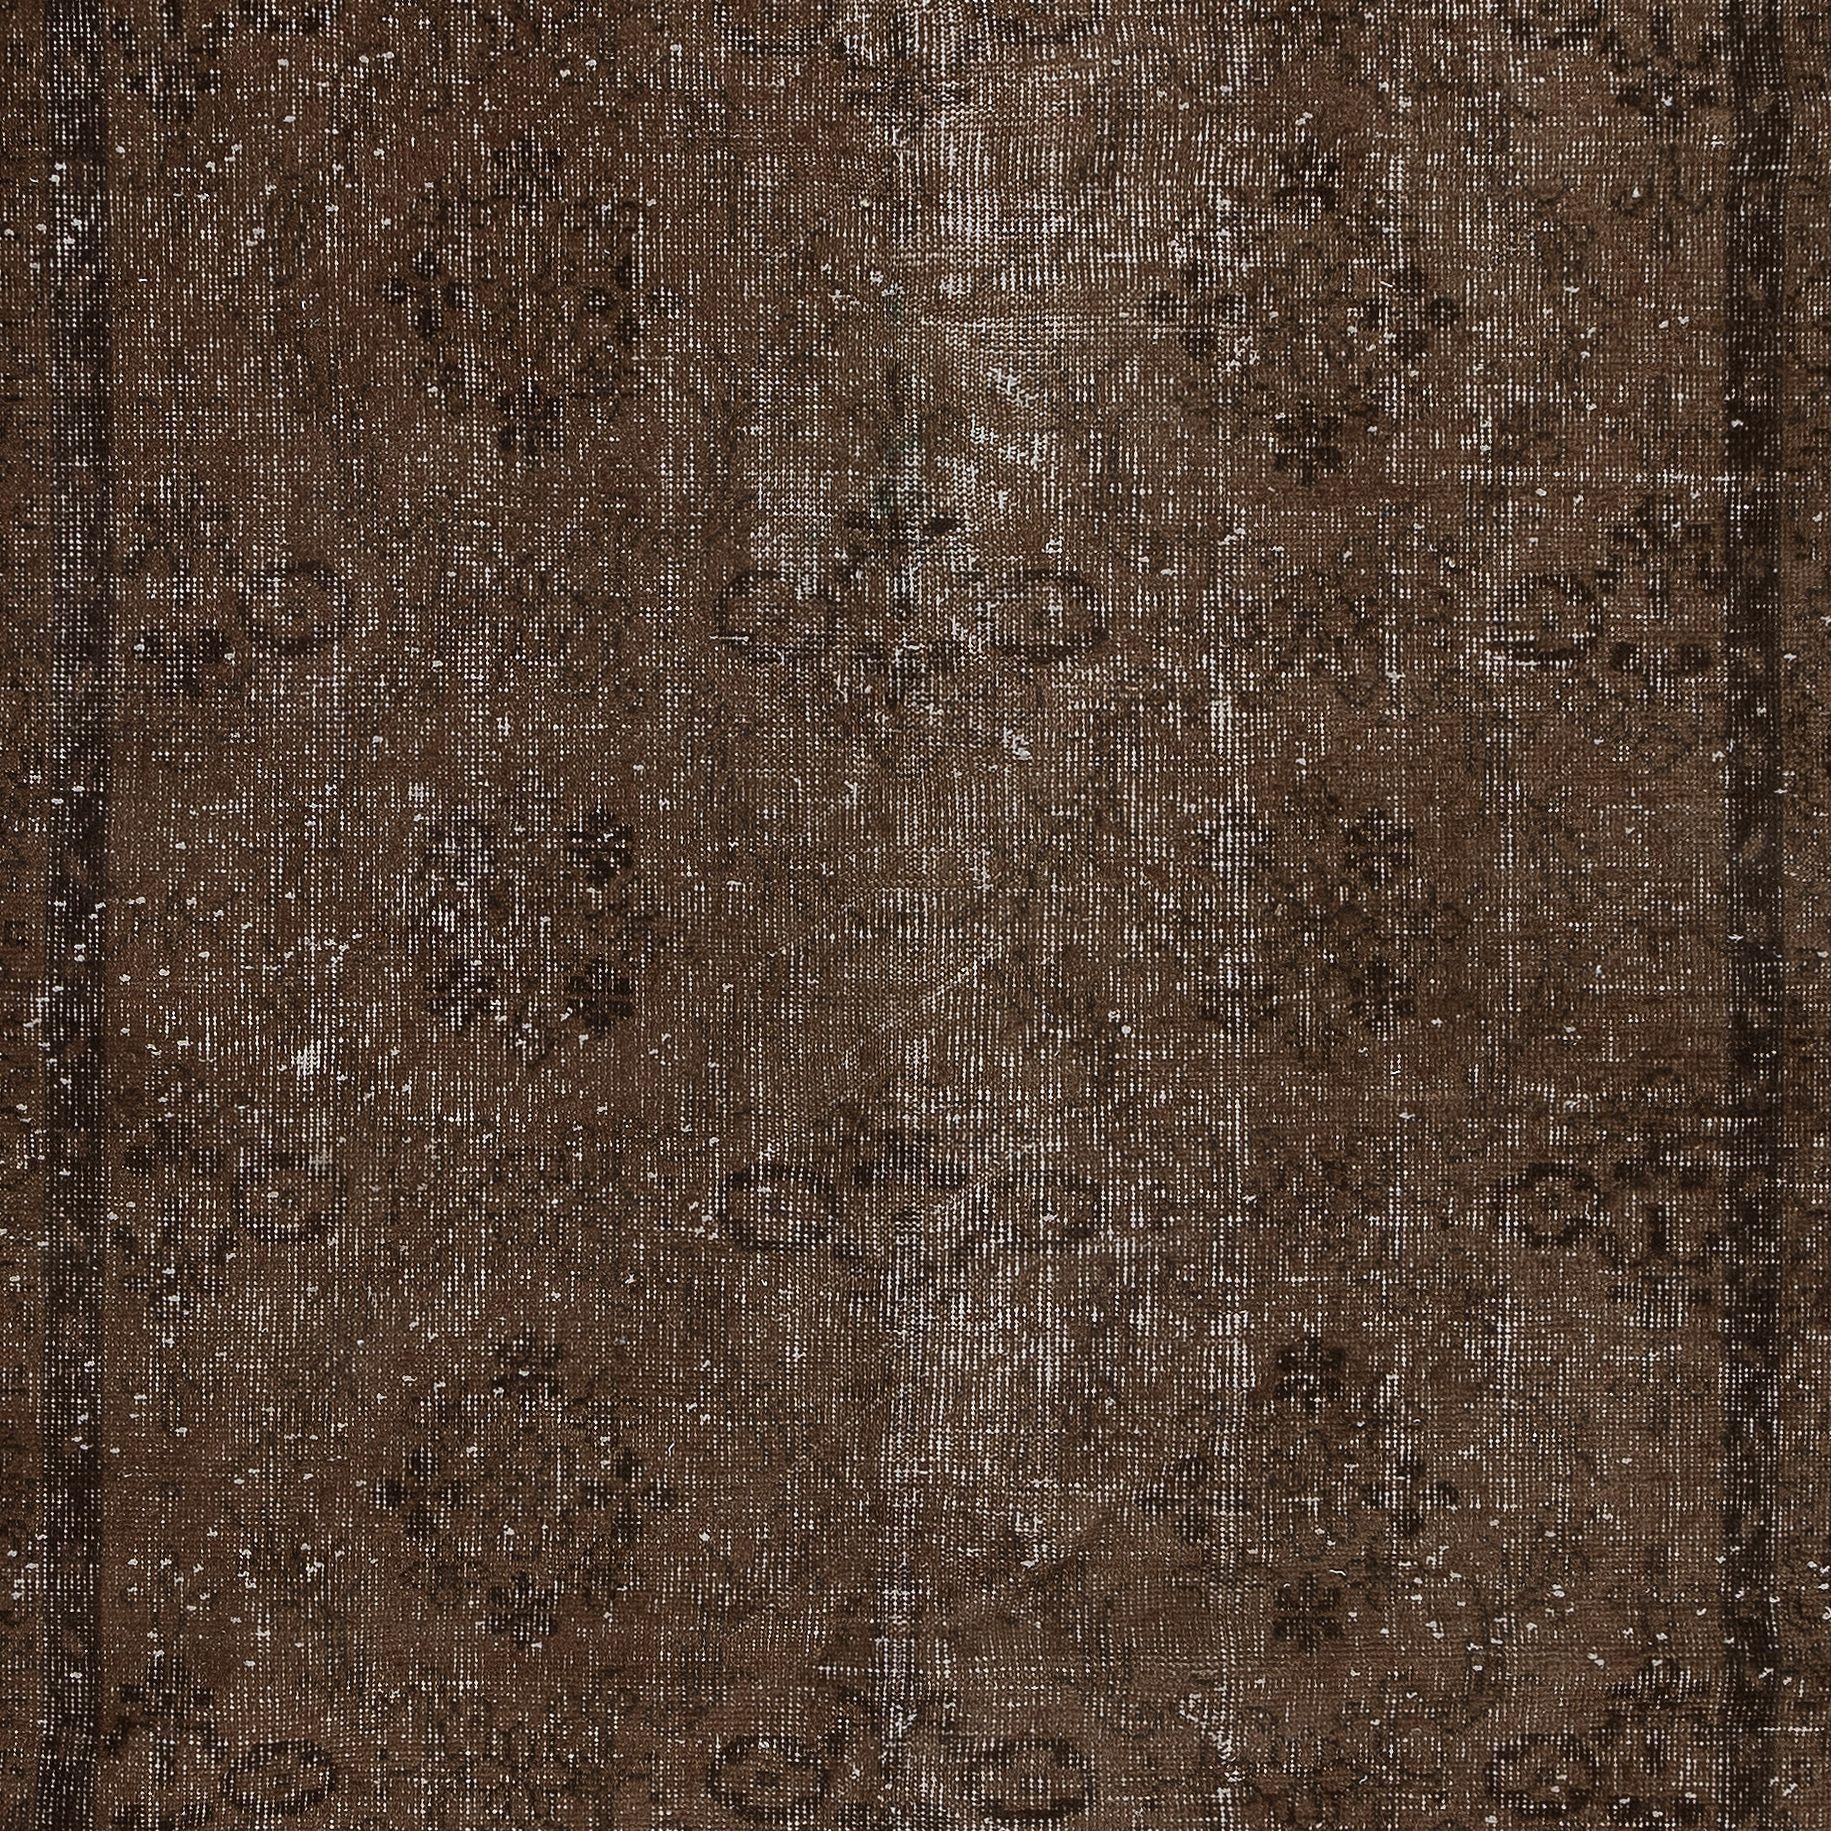 Hand-Knotted 4.8x9.2 Ft Brown Handmade Wool & Cotton Rug, Contemporary Turkish Carpet For Sale